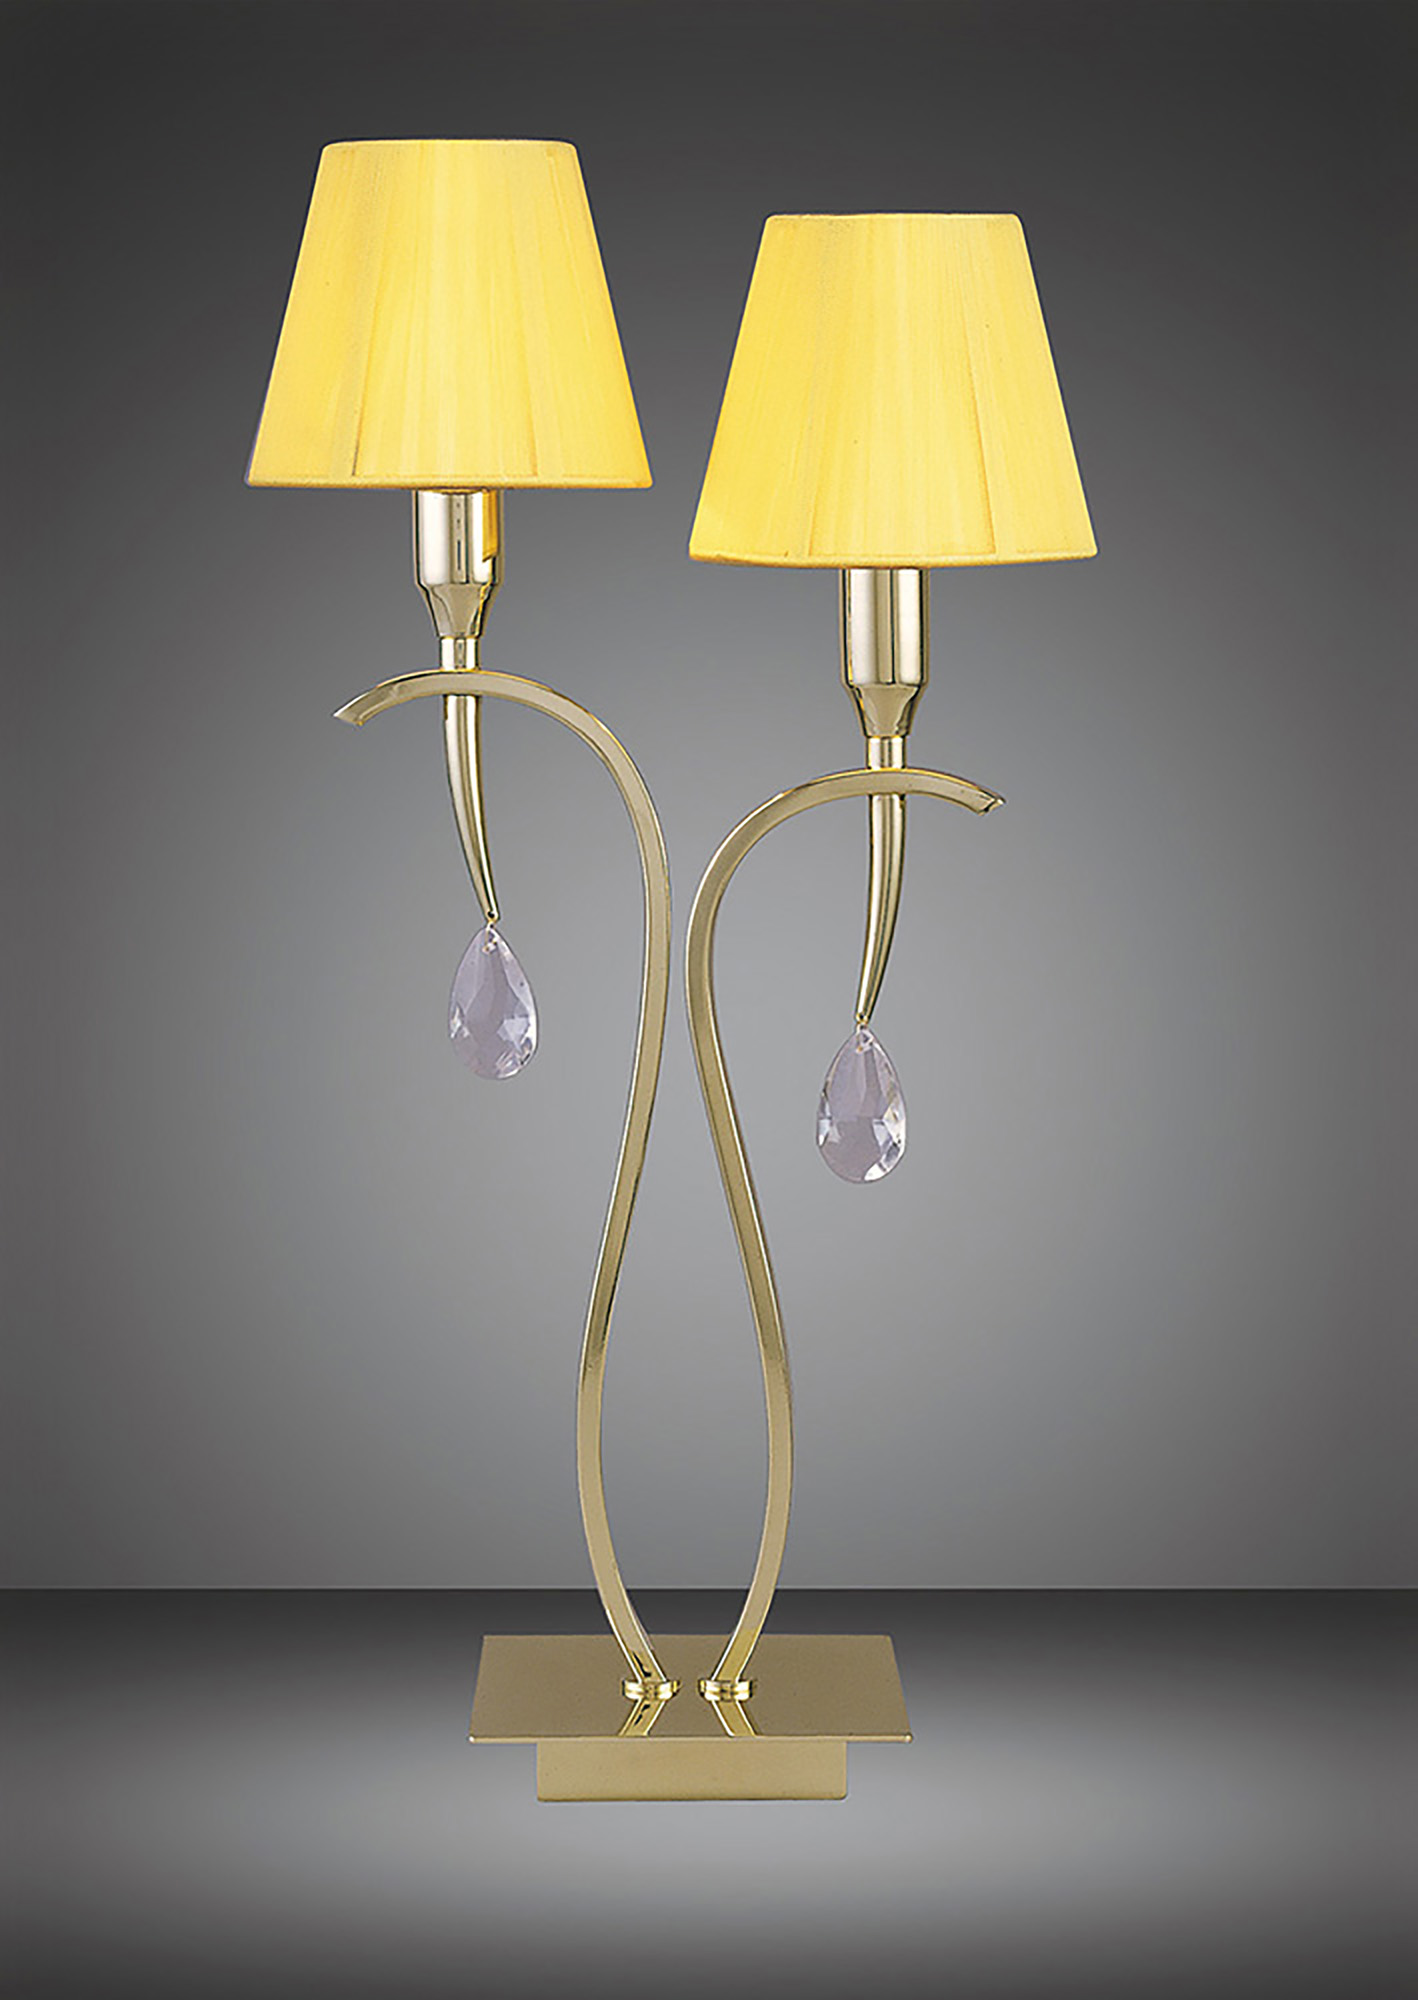 Siena Polished Brass Crystal Table Lamps Mantra Traditional Crystal Table Lamps